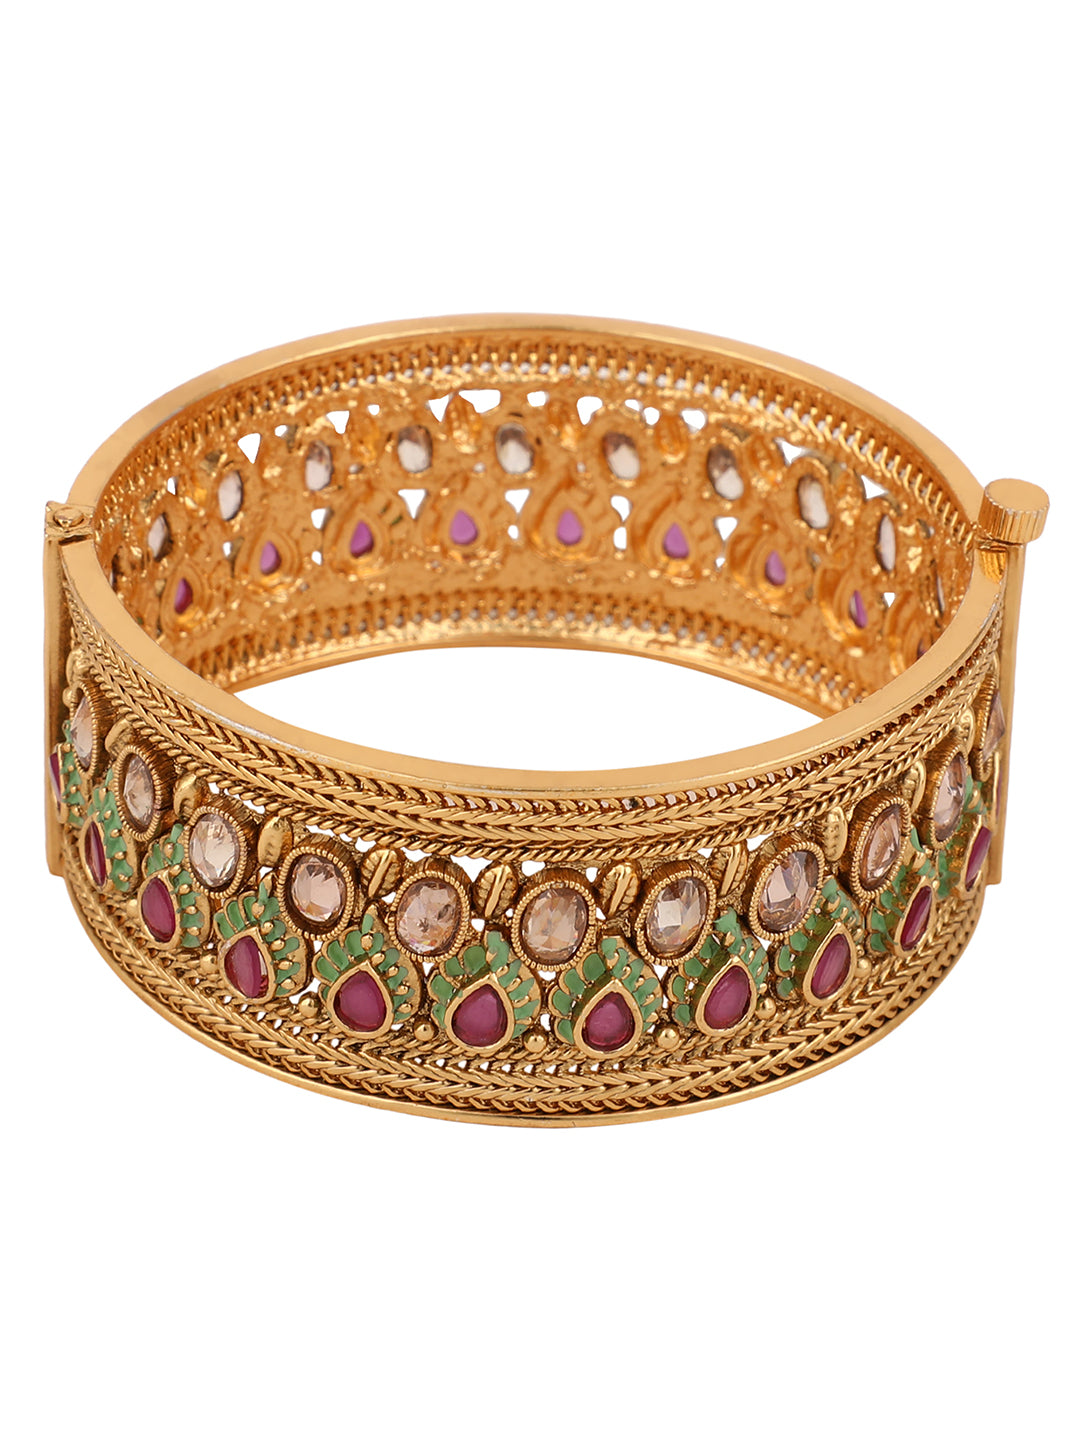 Women's Set Of 2 24 CT Gold-Plated & Red Stone-Studded Enamelled Meenakari Bangles - Anikas Creation